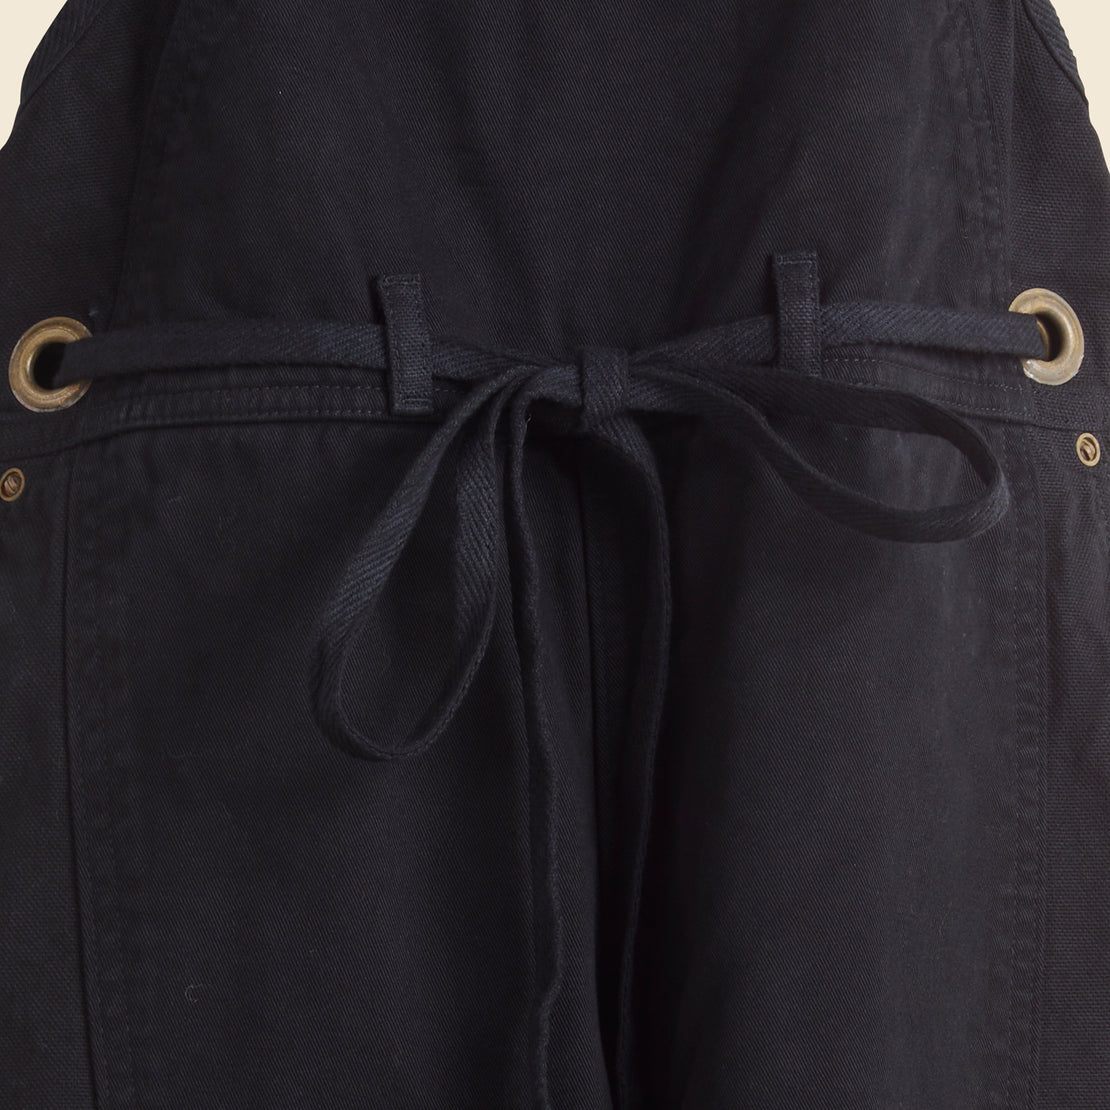 Lightweight  Canvas Welder Overall - Black - Kapital - STAG Provisions - W - Onepiece - Overalls